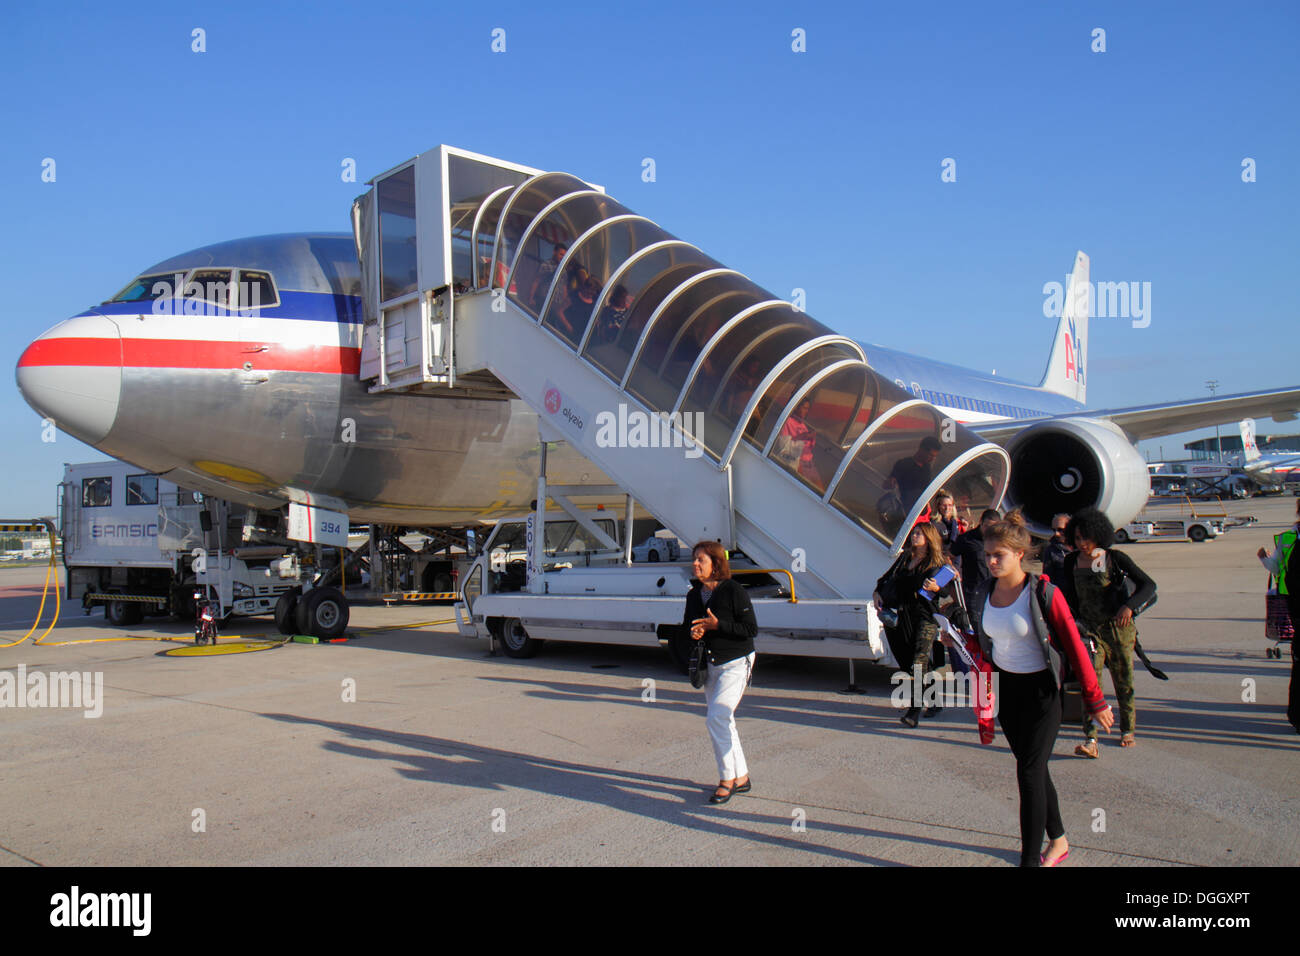 Paris France,CDG,Charles de Gaulle Airport,American Airline,arriving,passenger passengers rider riders,disembarking,tarmac,commercial airliner airplan Stock Photo